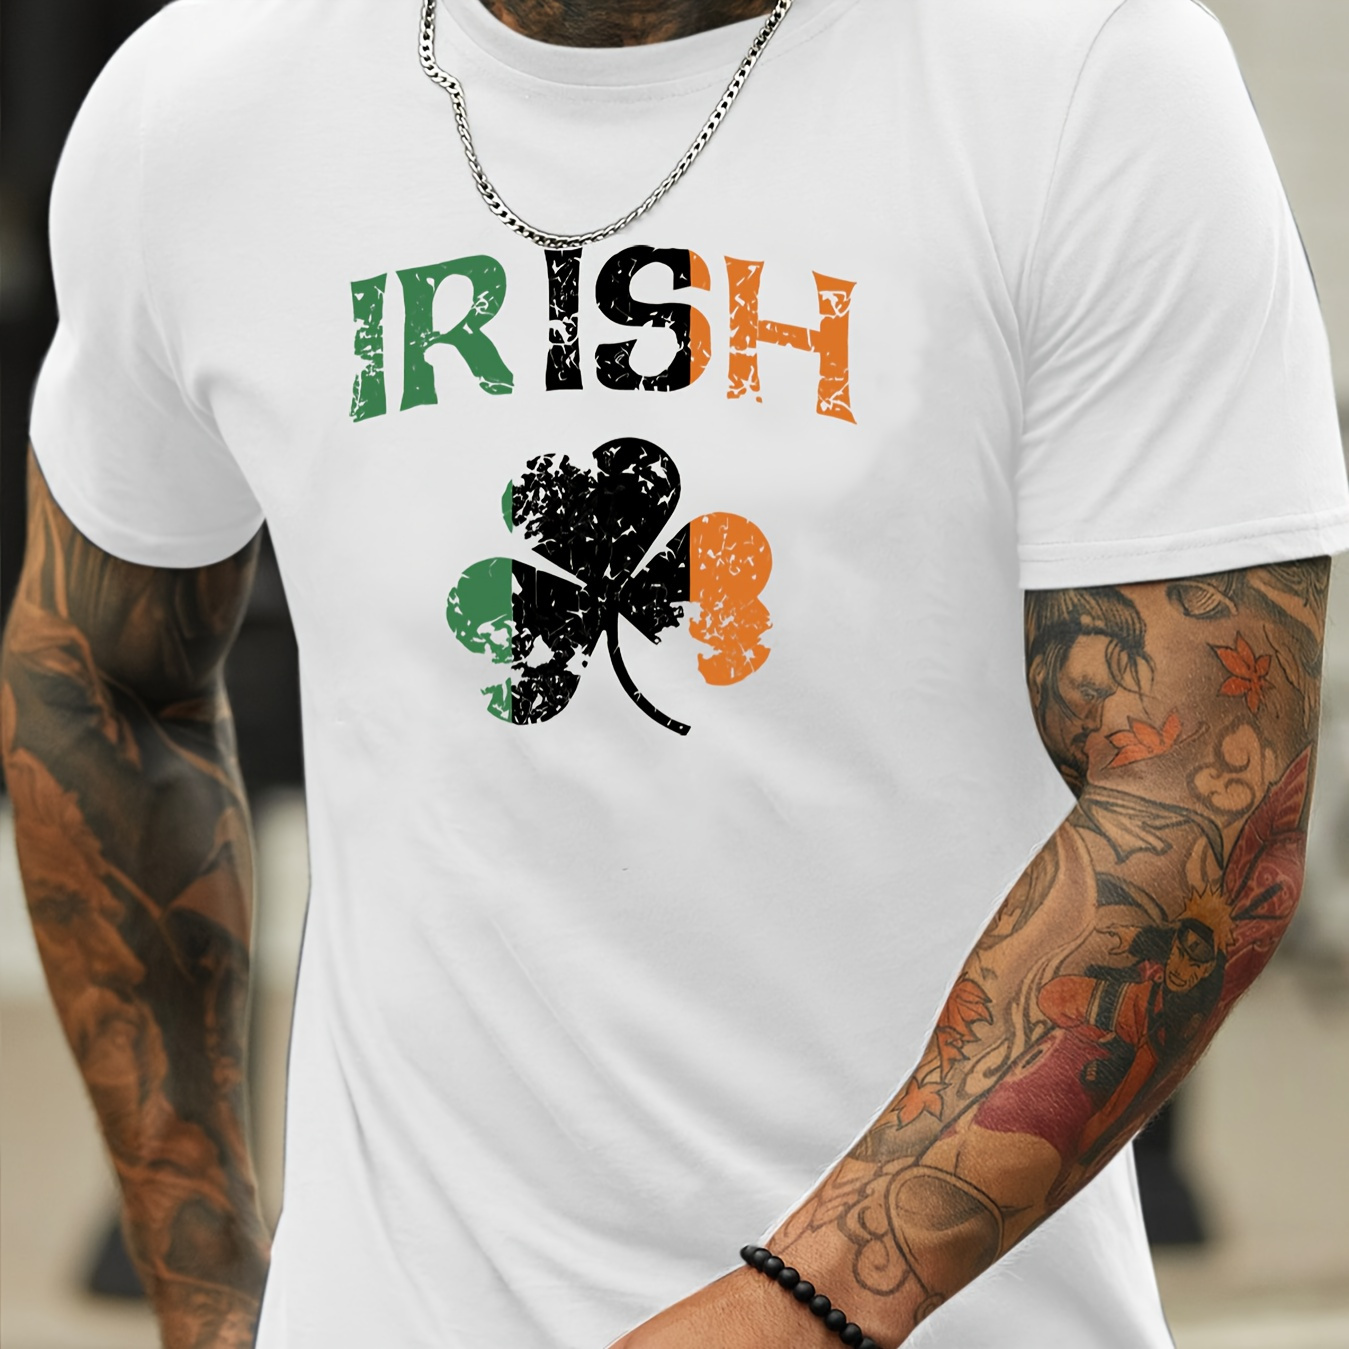 

Clover Graphic Irish Print T-shirt, Tees For Men, Breathable Street Trendy Fashion, Comfortable Round Neck T-shirt, Casual Short Sleeve Top For Summer